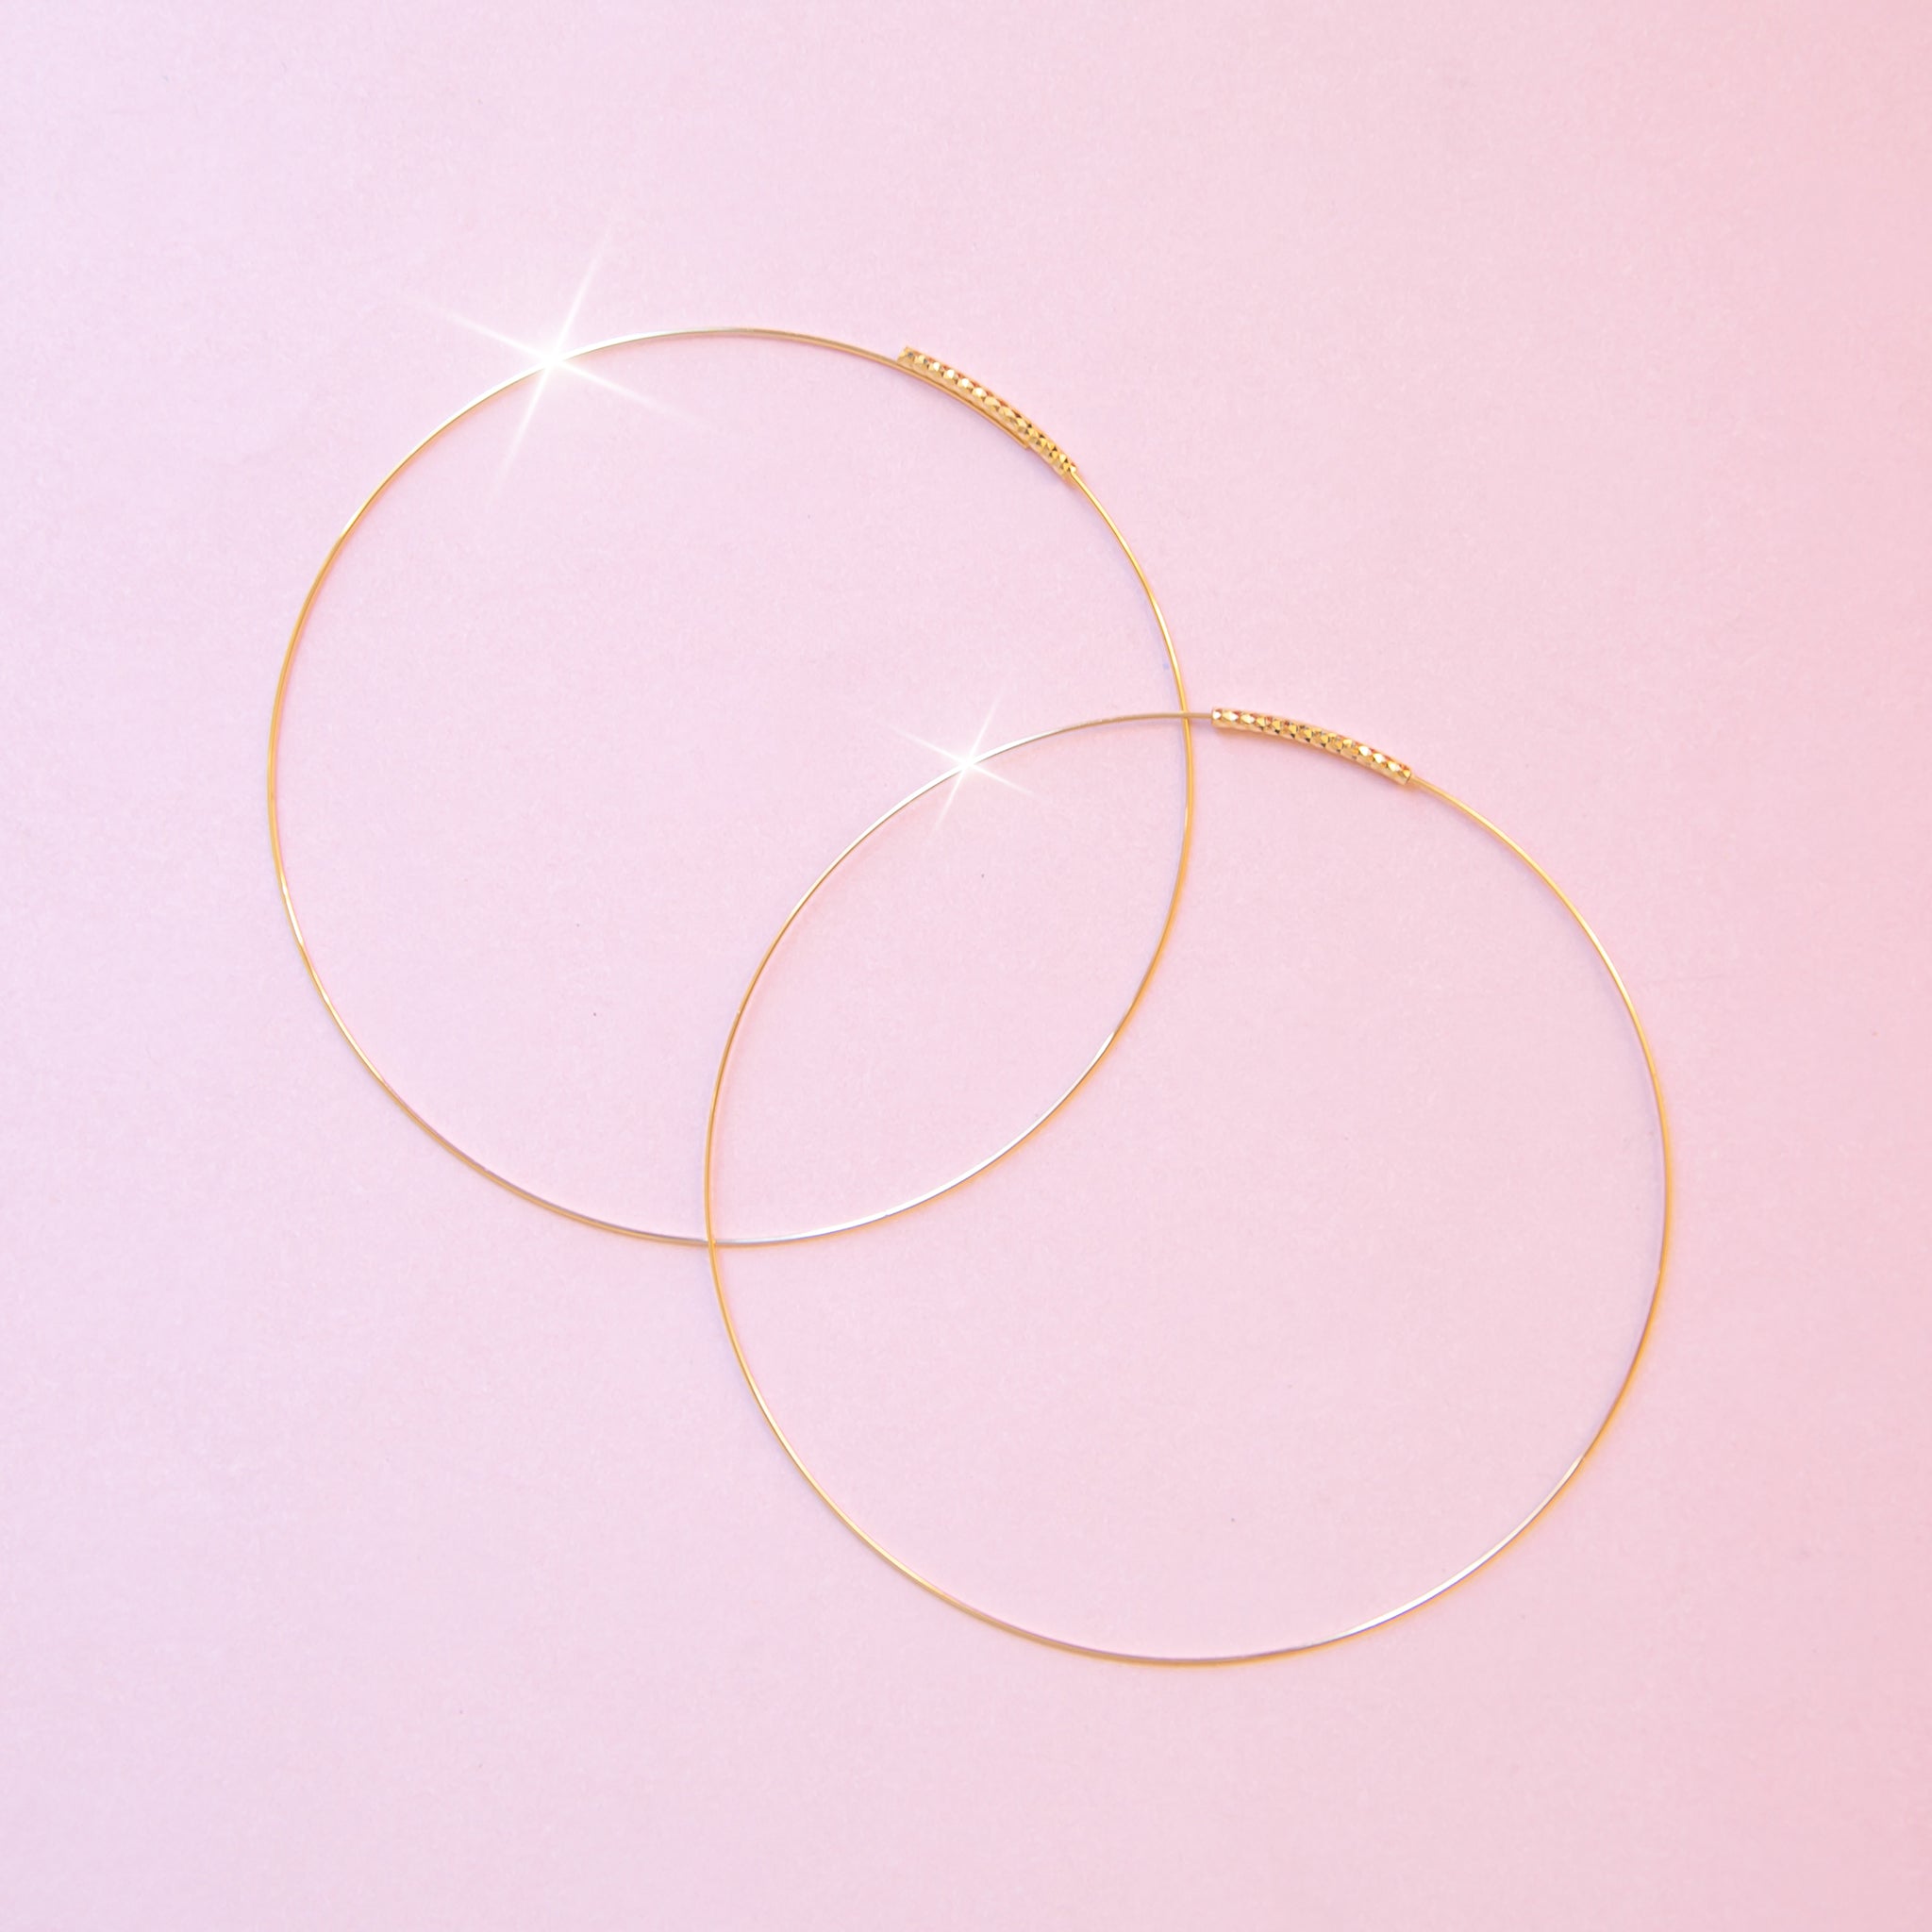 On a pink background is a pair of dainty gold hoop earrings. 